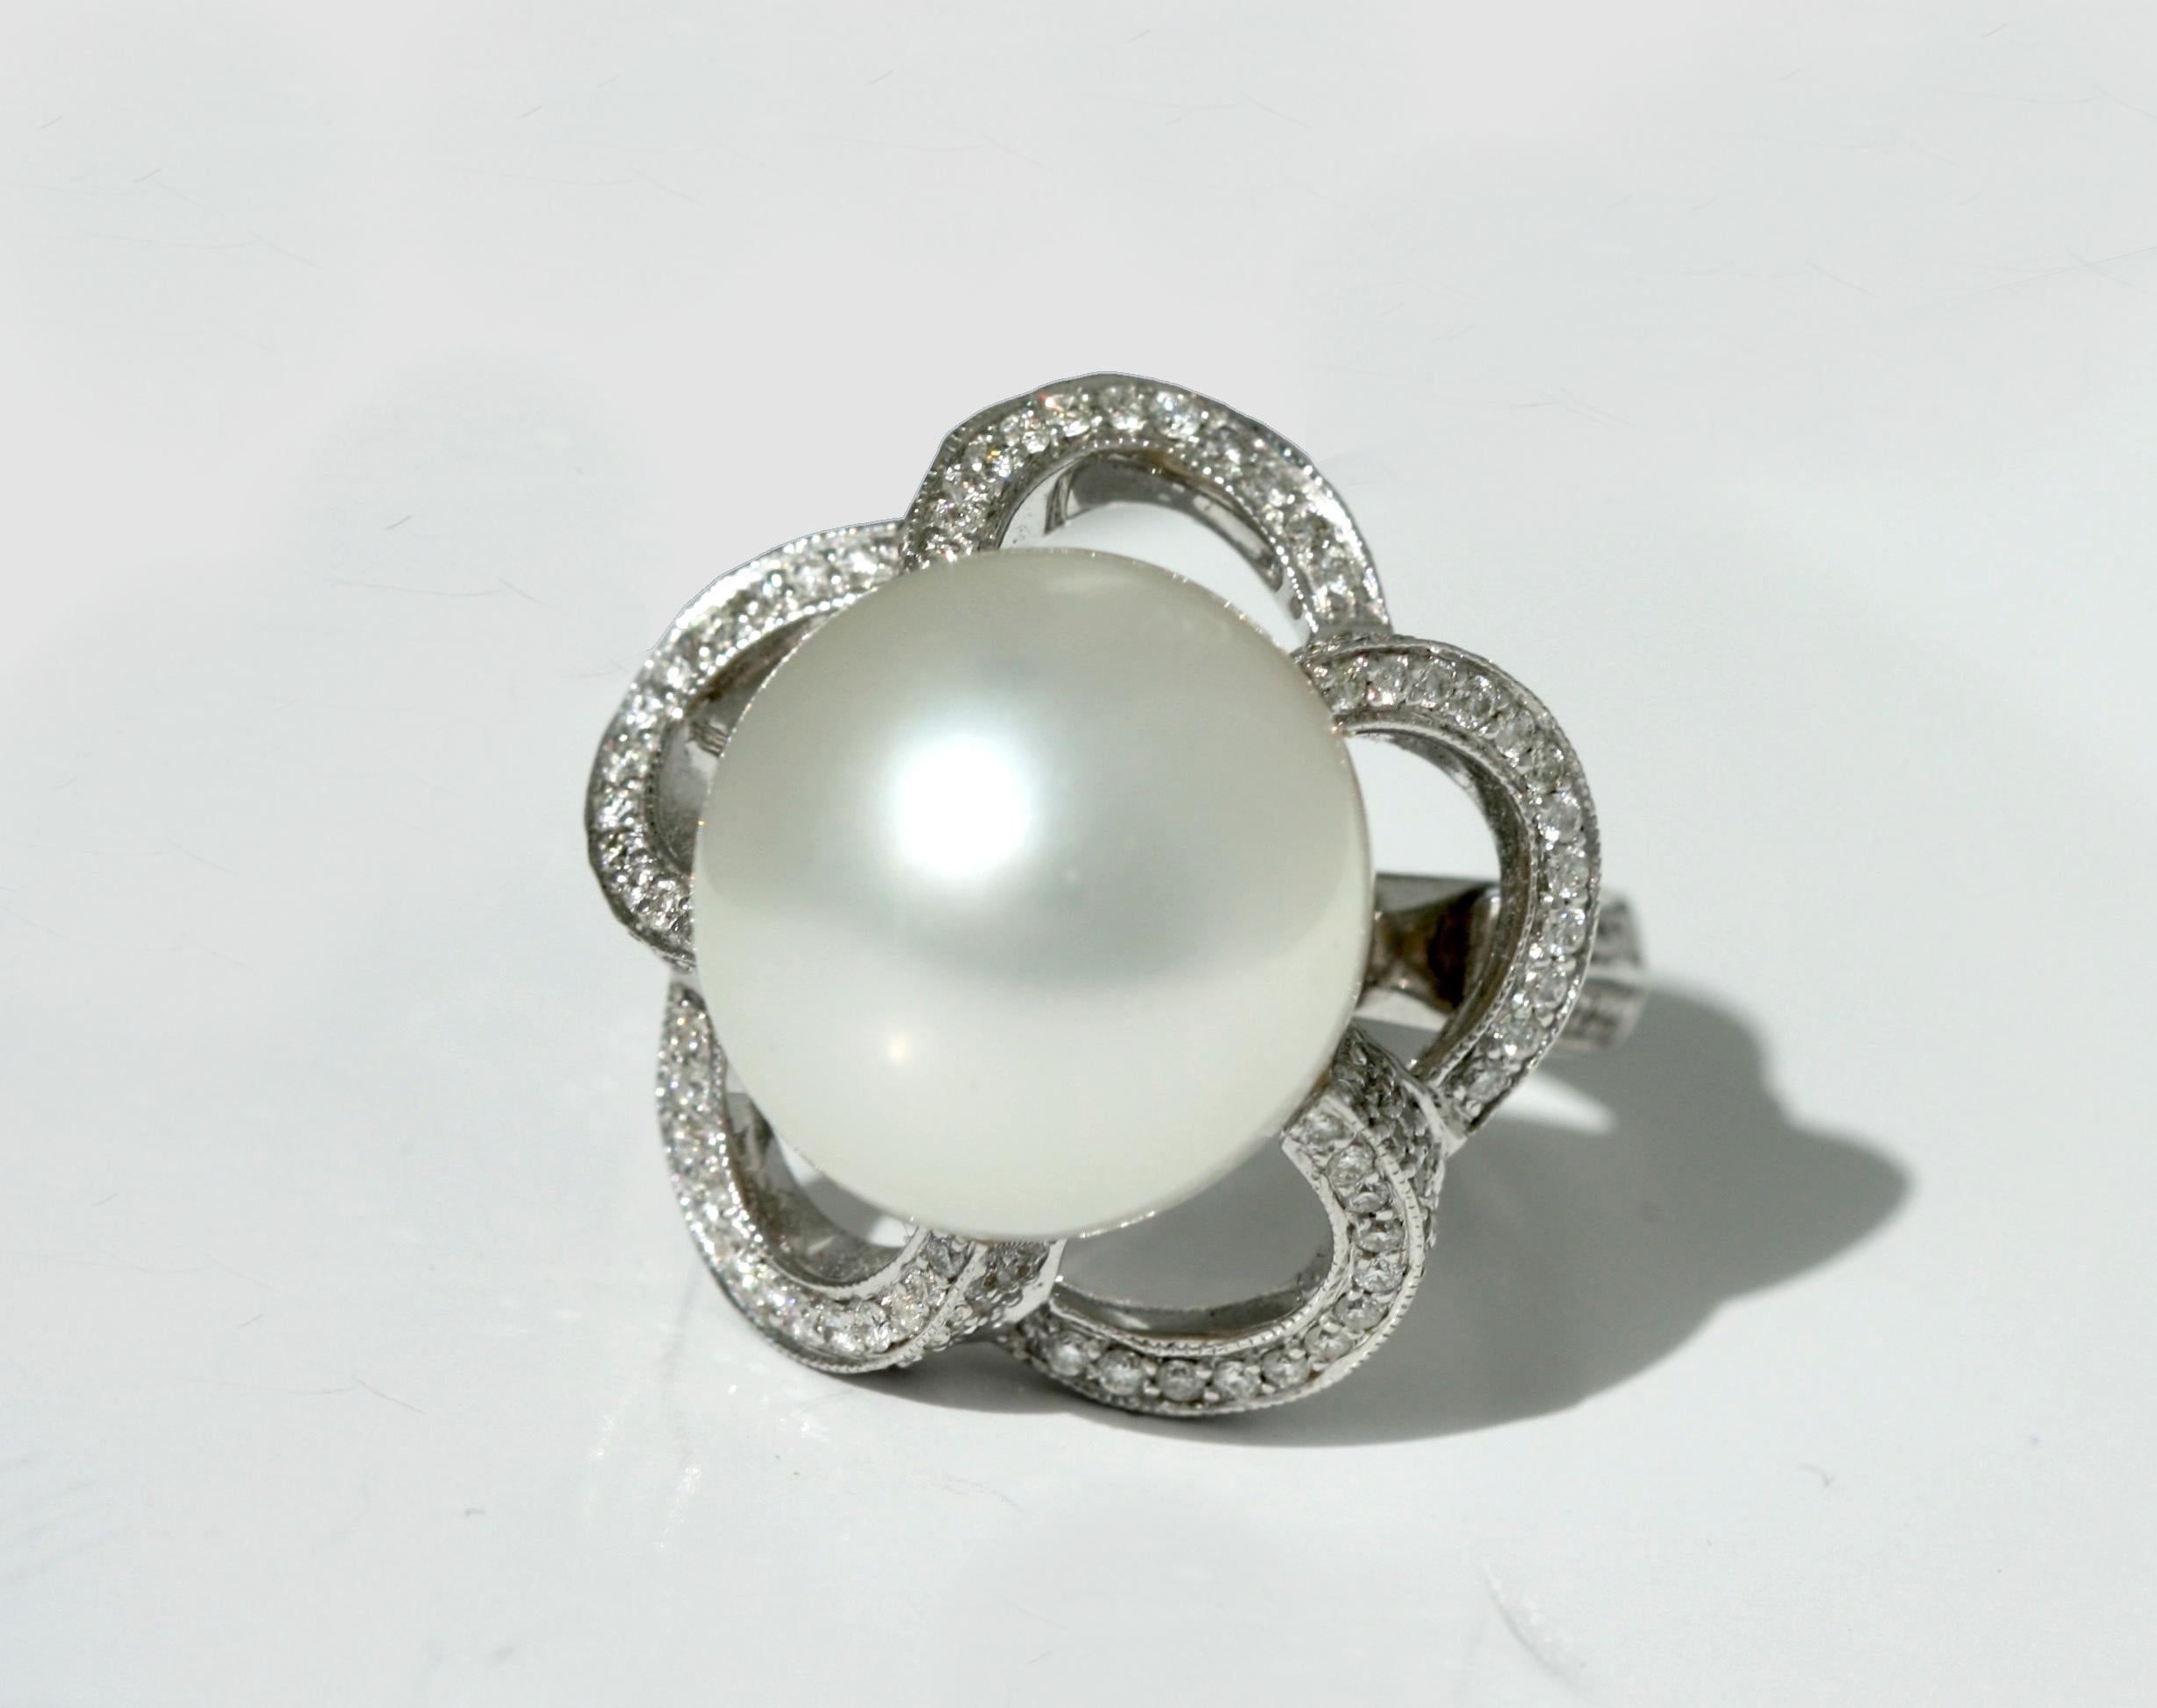 18 Karat White Gold, Diamond and Cultured Pearl Ring
Centered by a pearl measuring approximately 13.6 by 13.9 mm 
accented by round diamonds weighing approximately 1.0 carats, size 6.
